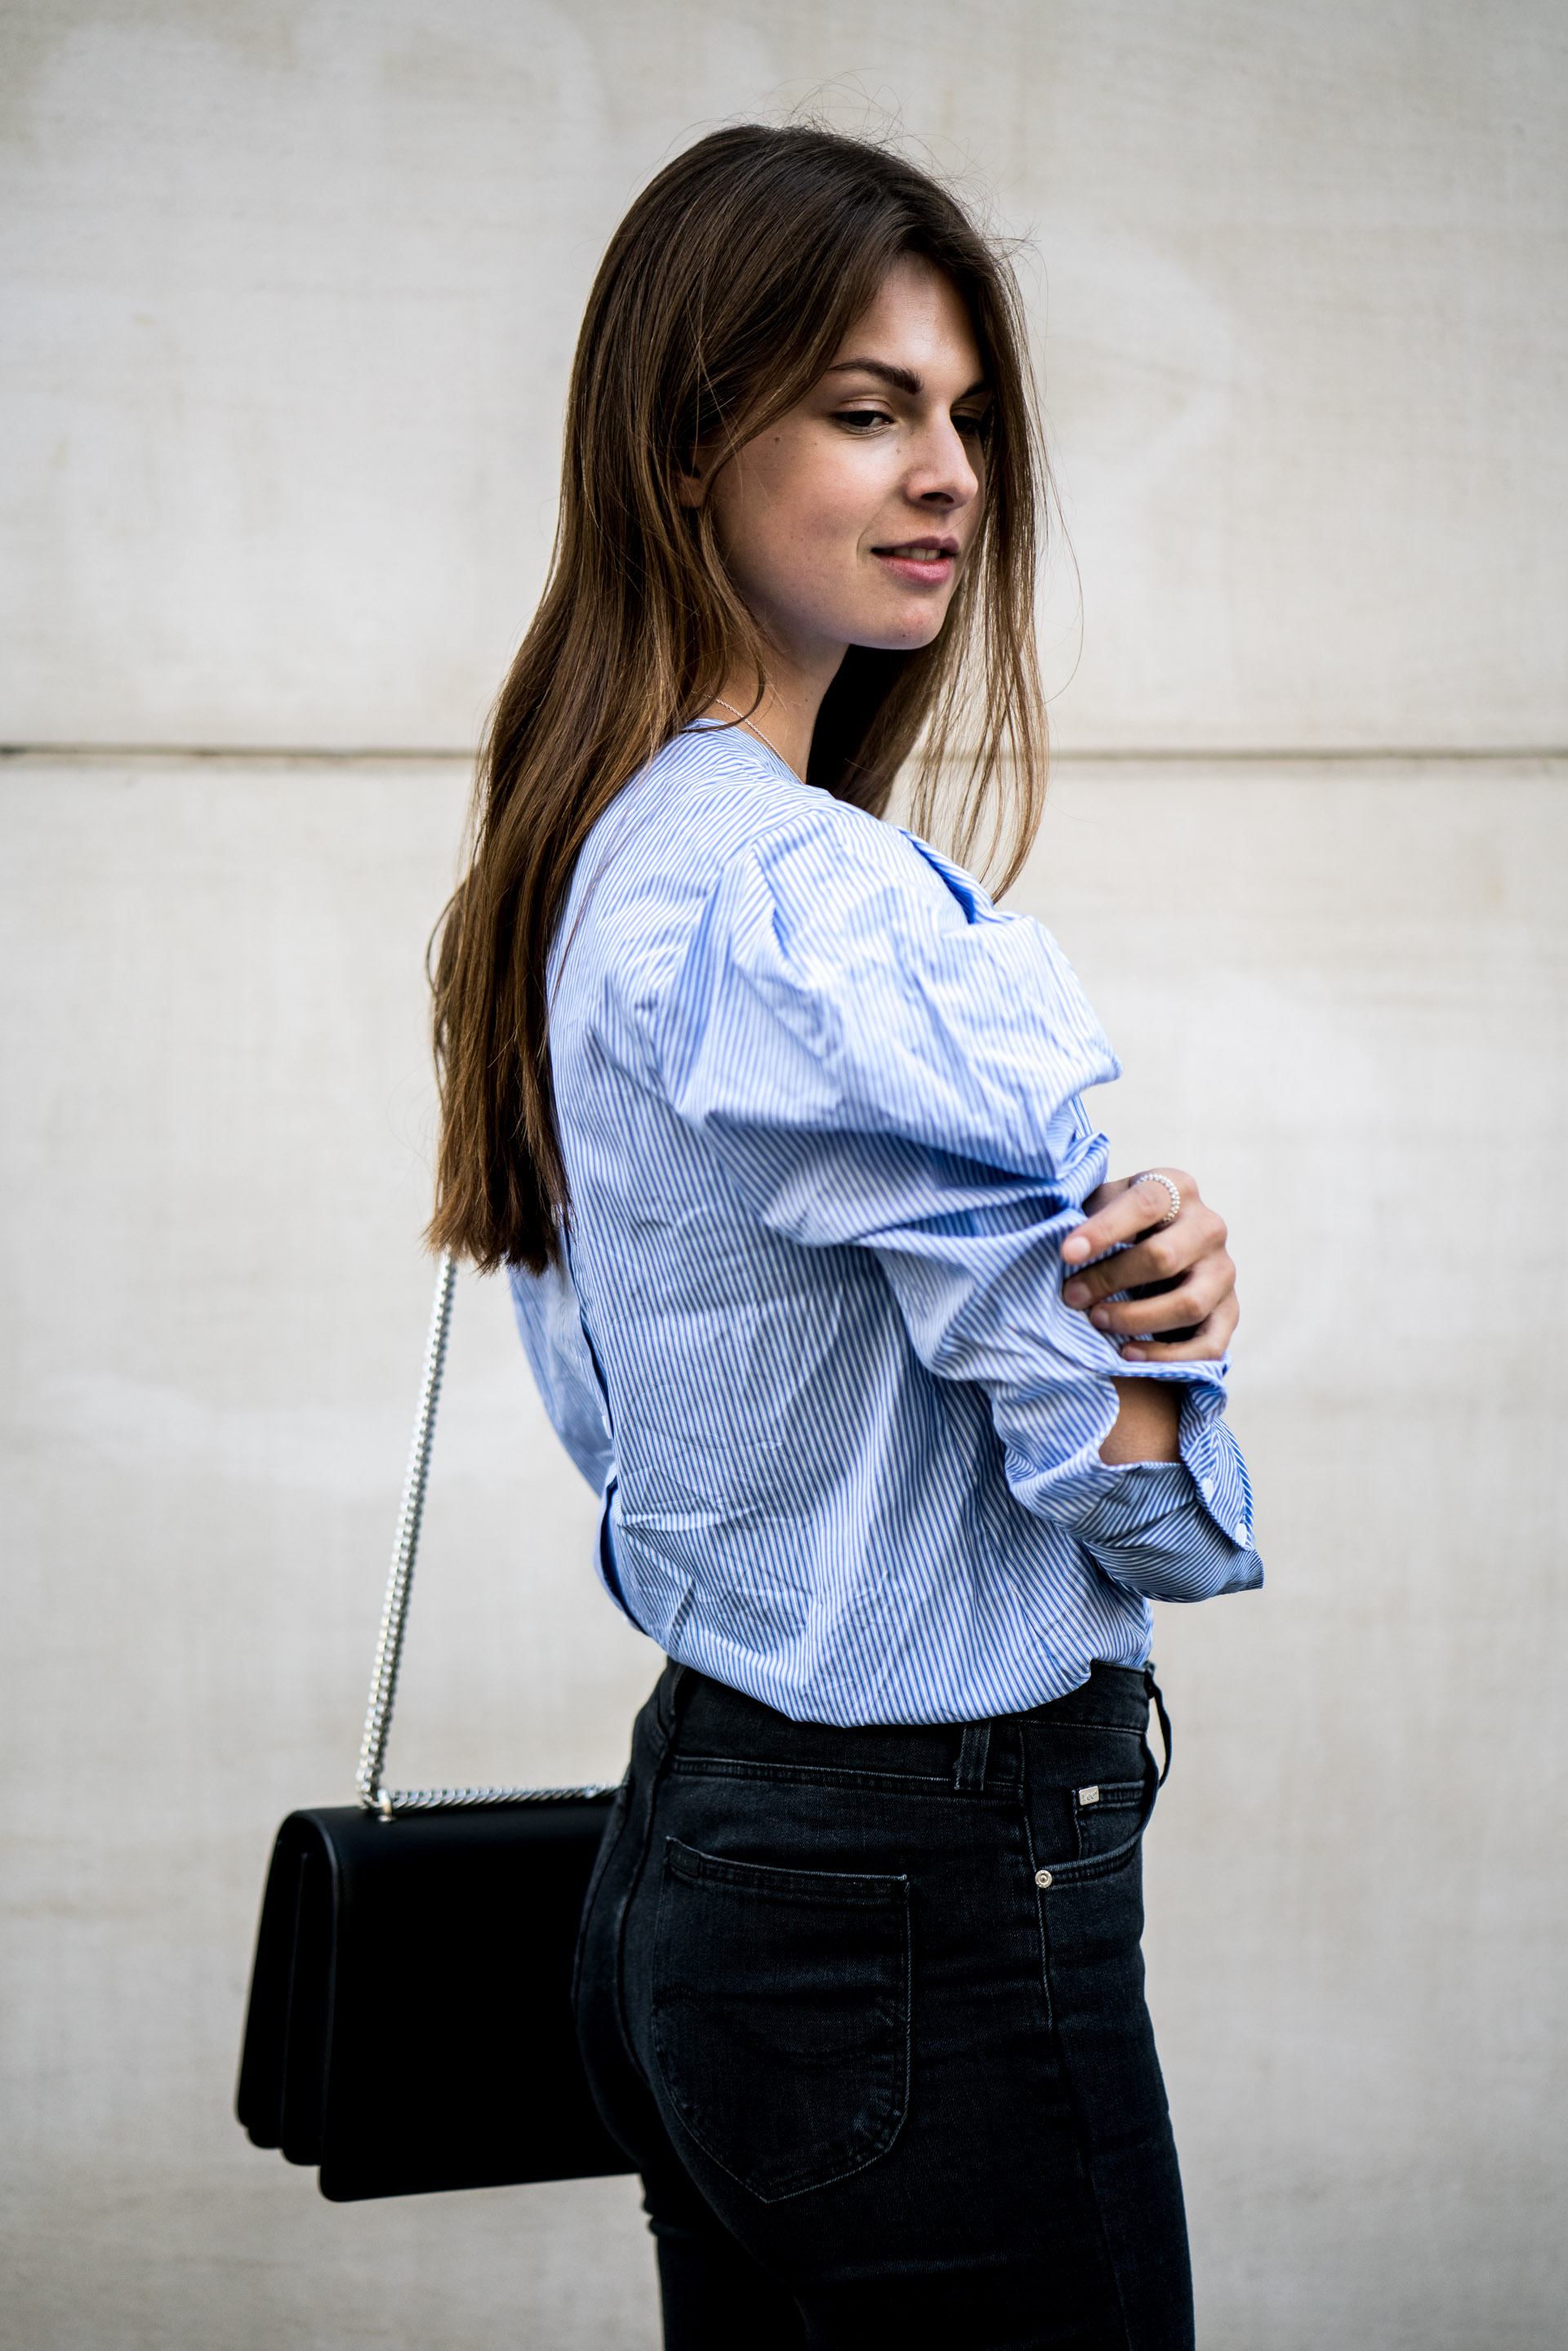 How to wear a striped shirt || Striped shirt with buttons on the back